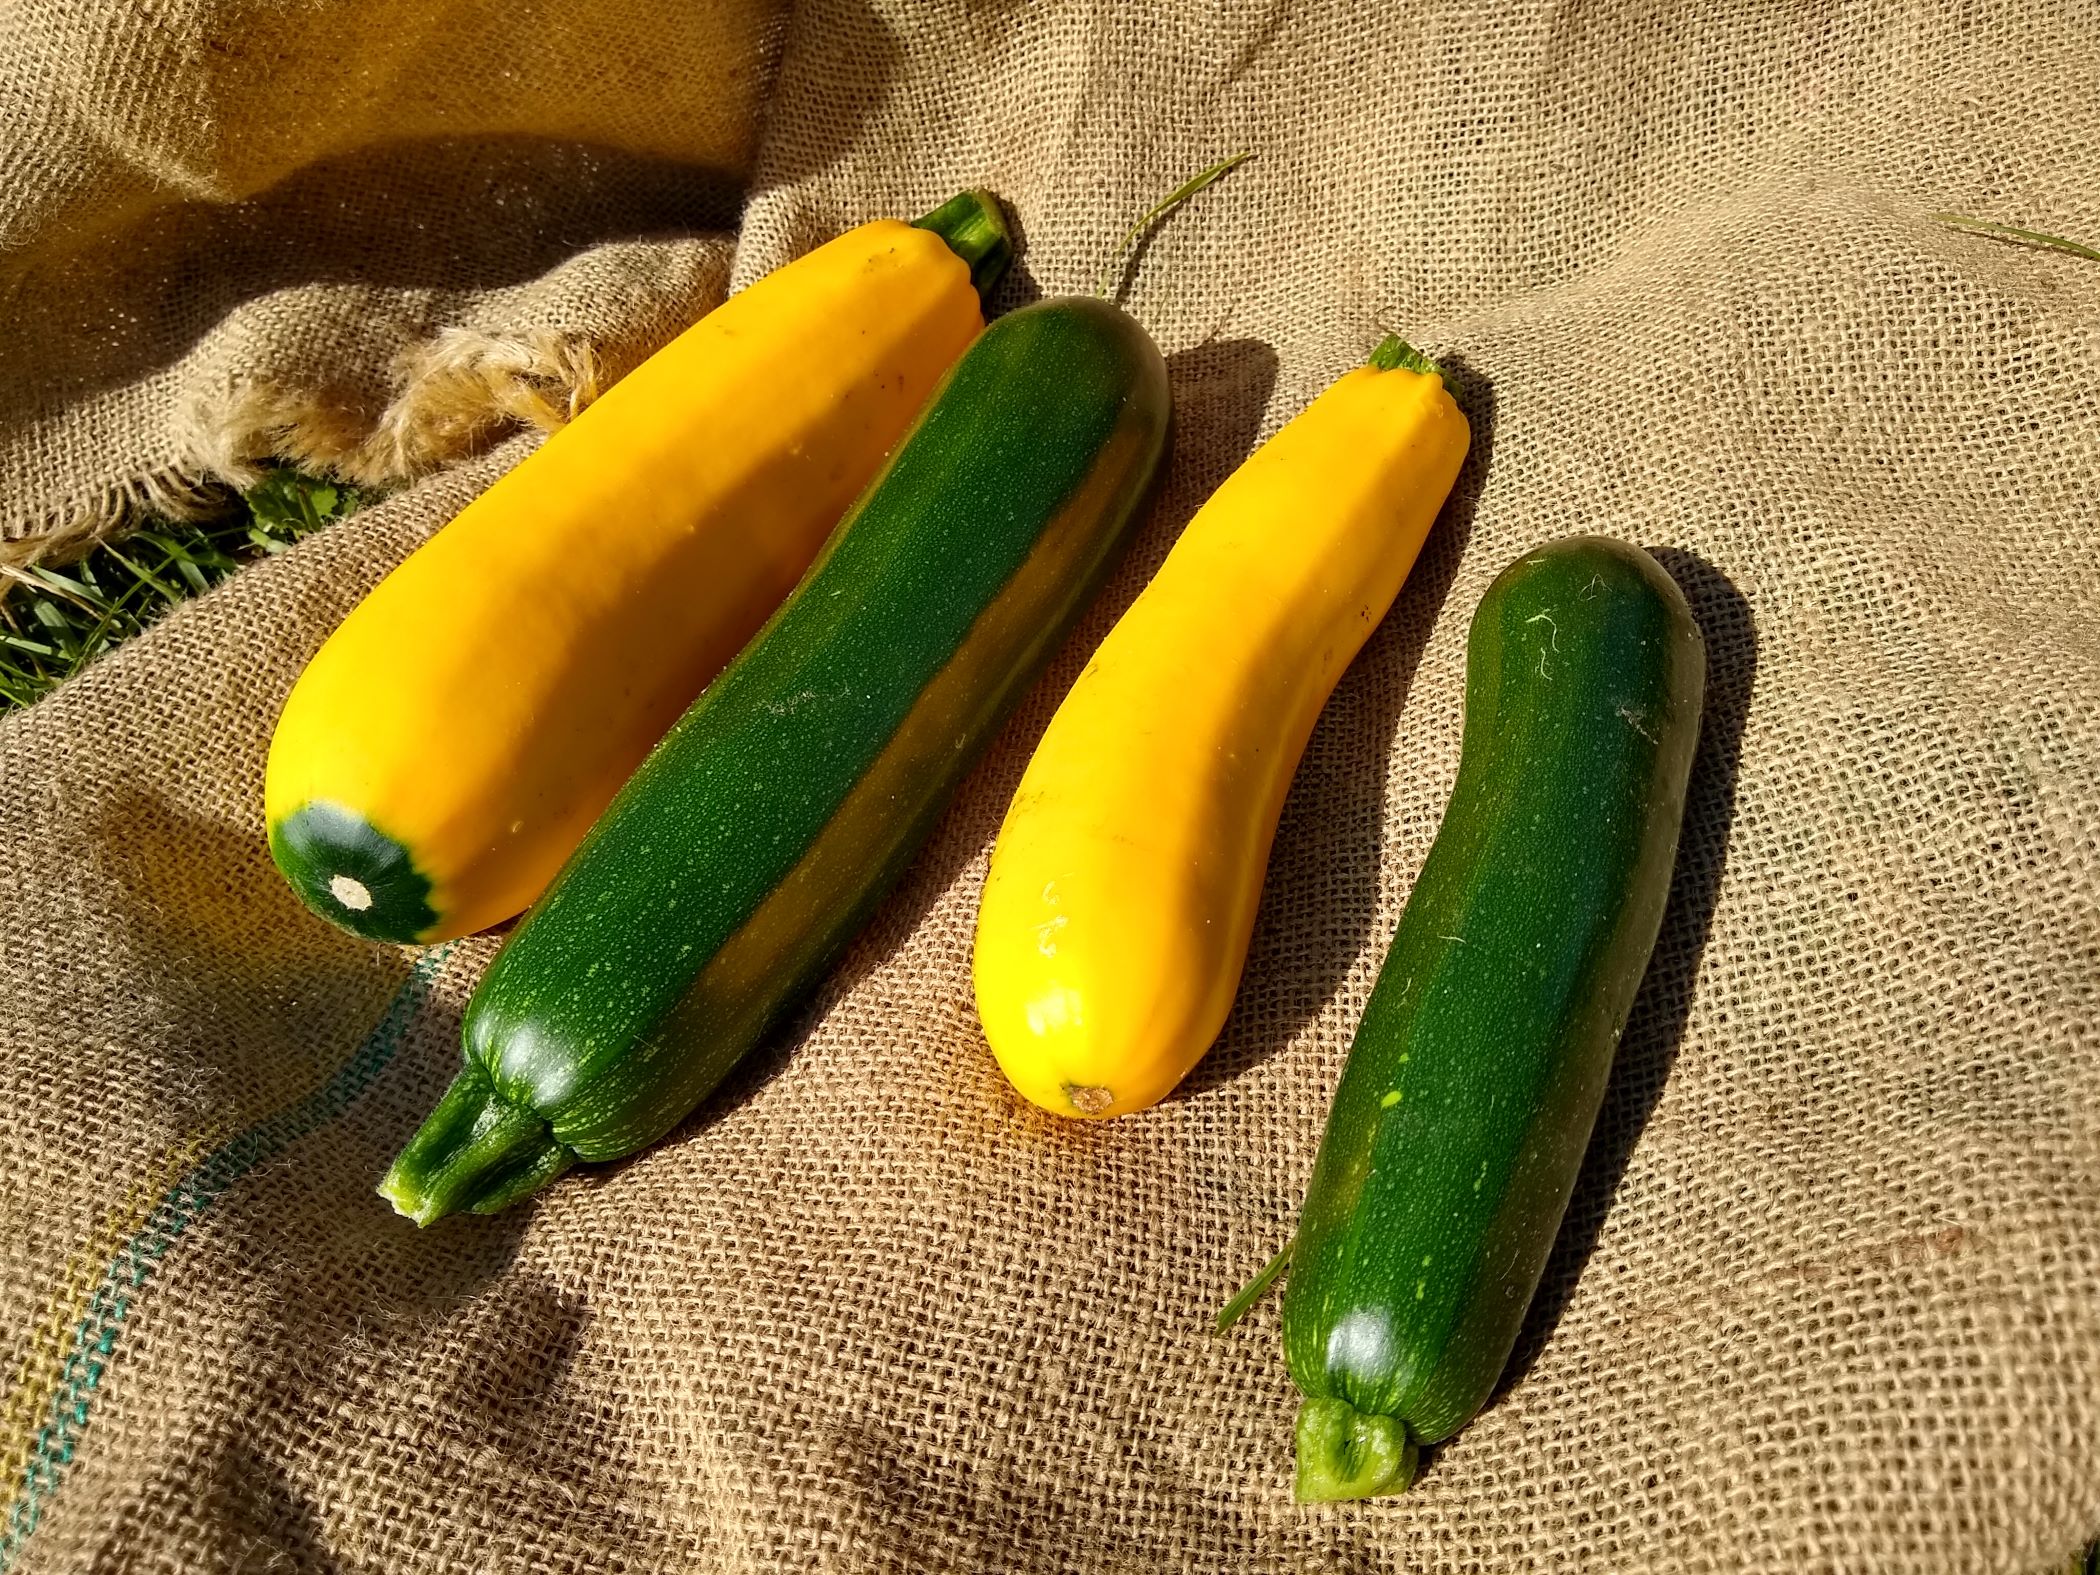 2 green and 2 yellow summer squash sitting on a burlap sack